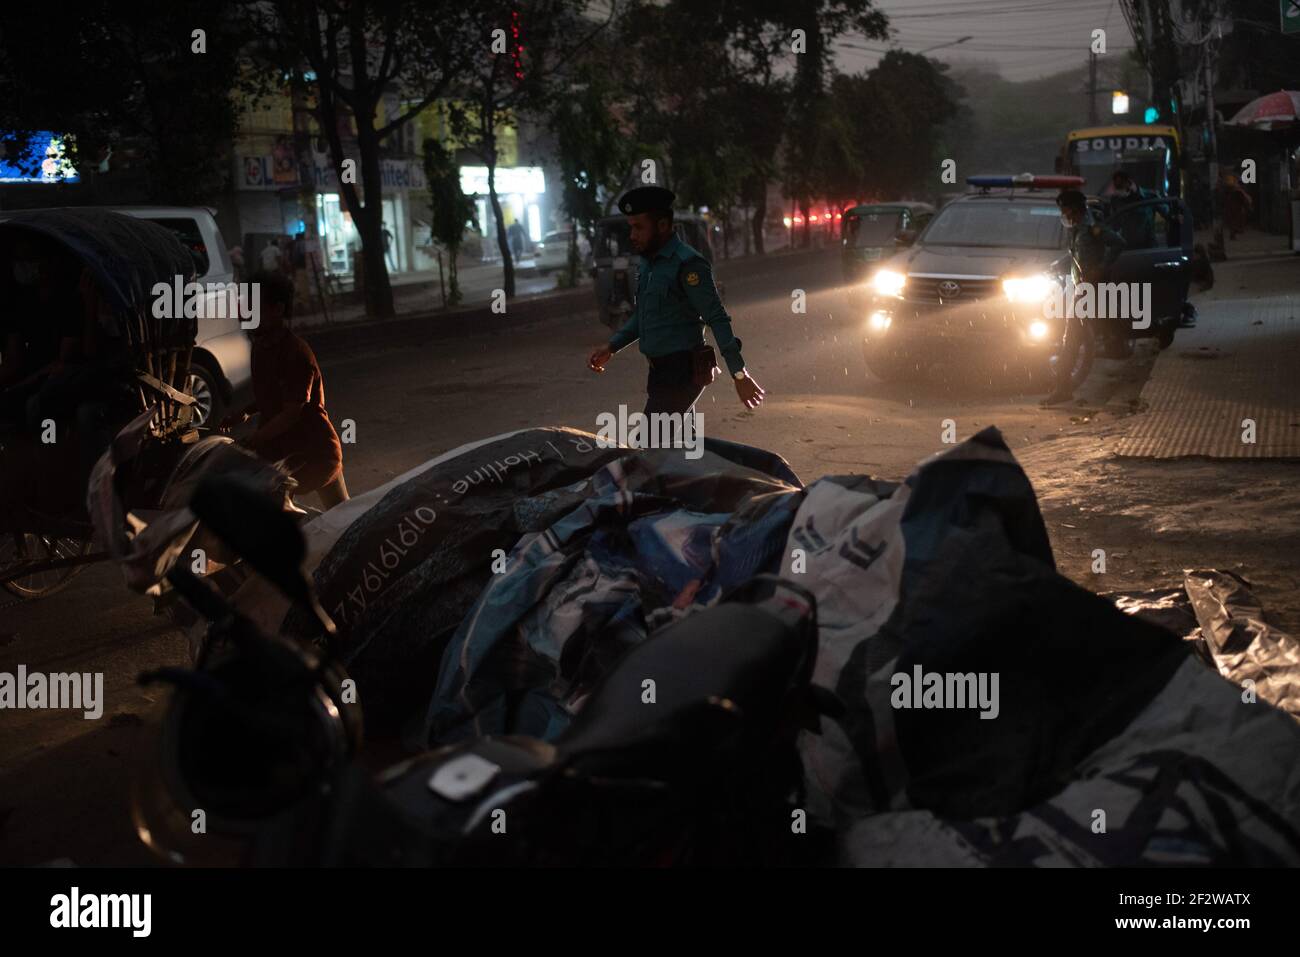 Dhaka, Dhaka, Bangladesh. 13th Mar, 2021. A police officer is seen walk fast to get shelter to escape the storm. The capital Dhaka of Bangladesh washed with a sudden heavy storm along with rains today afternoon. Credit: Fatima-Tuj Johora/ZUMA Wire/Alamy Live News Stock Photo